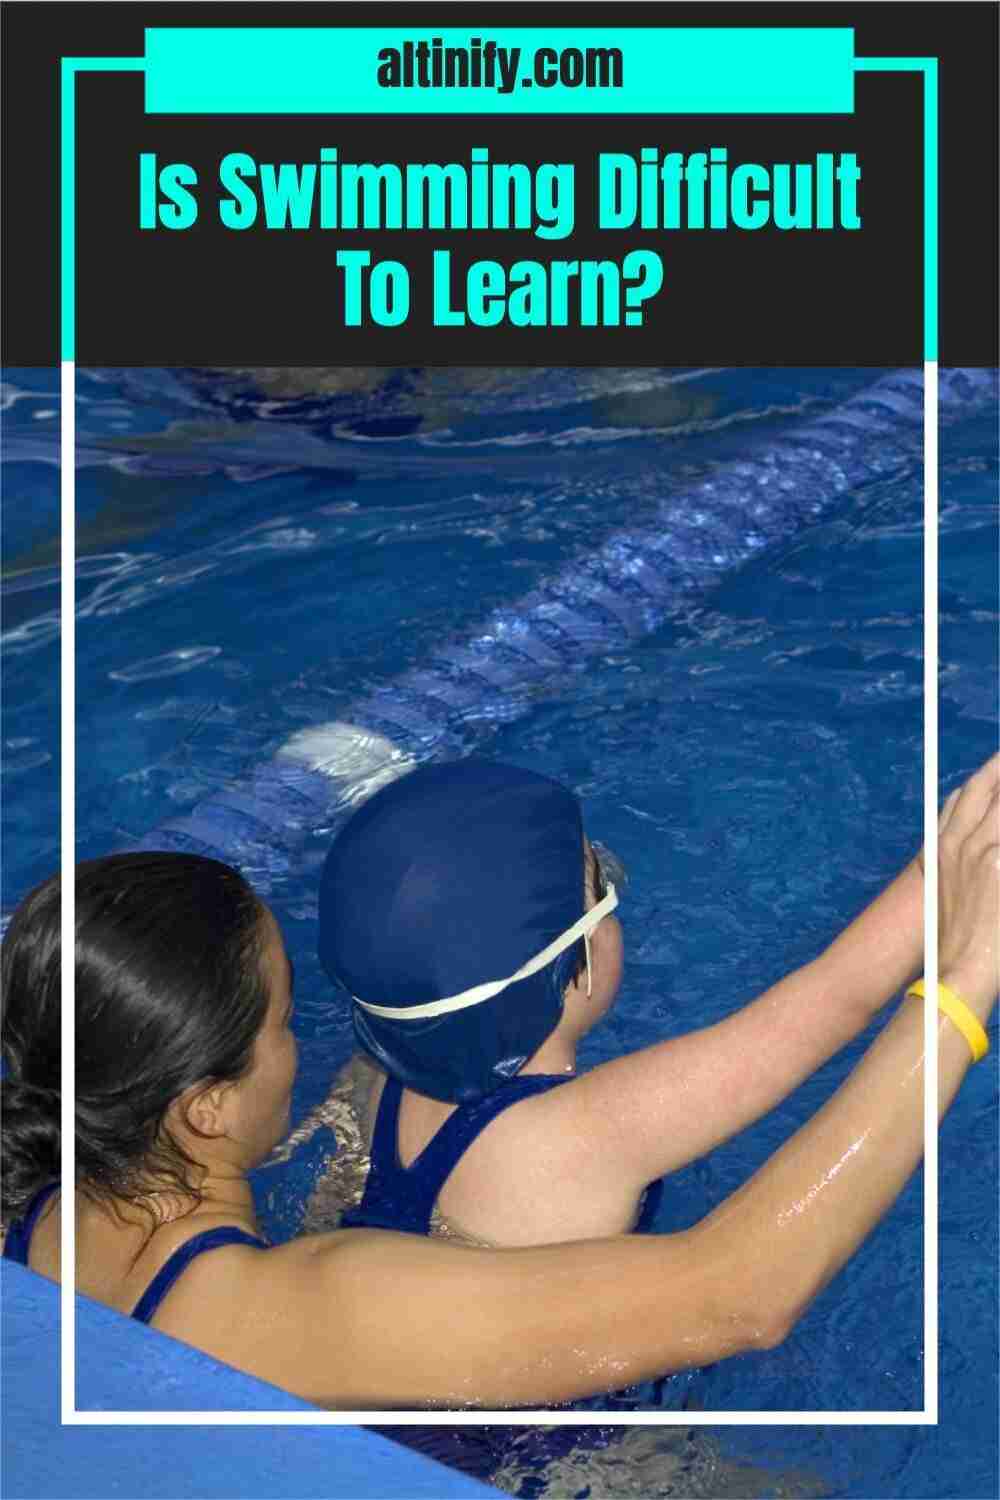 Is Swimming Difficult To Learn? (We Find Out)